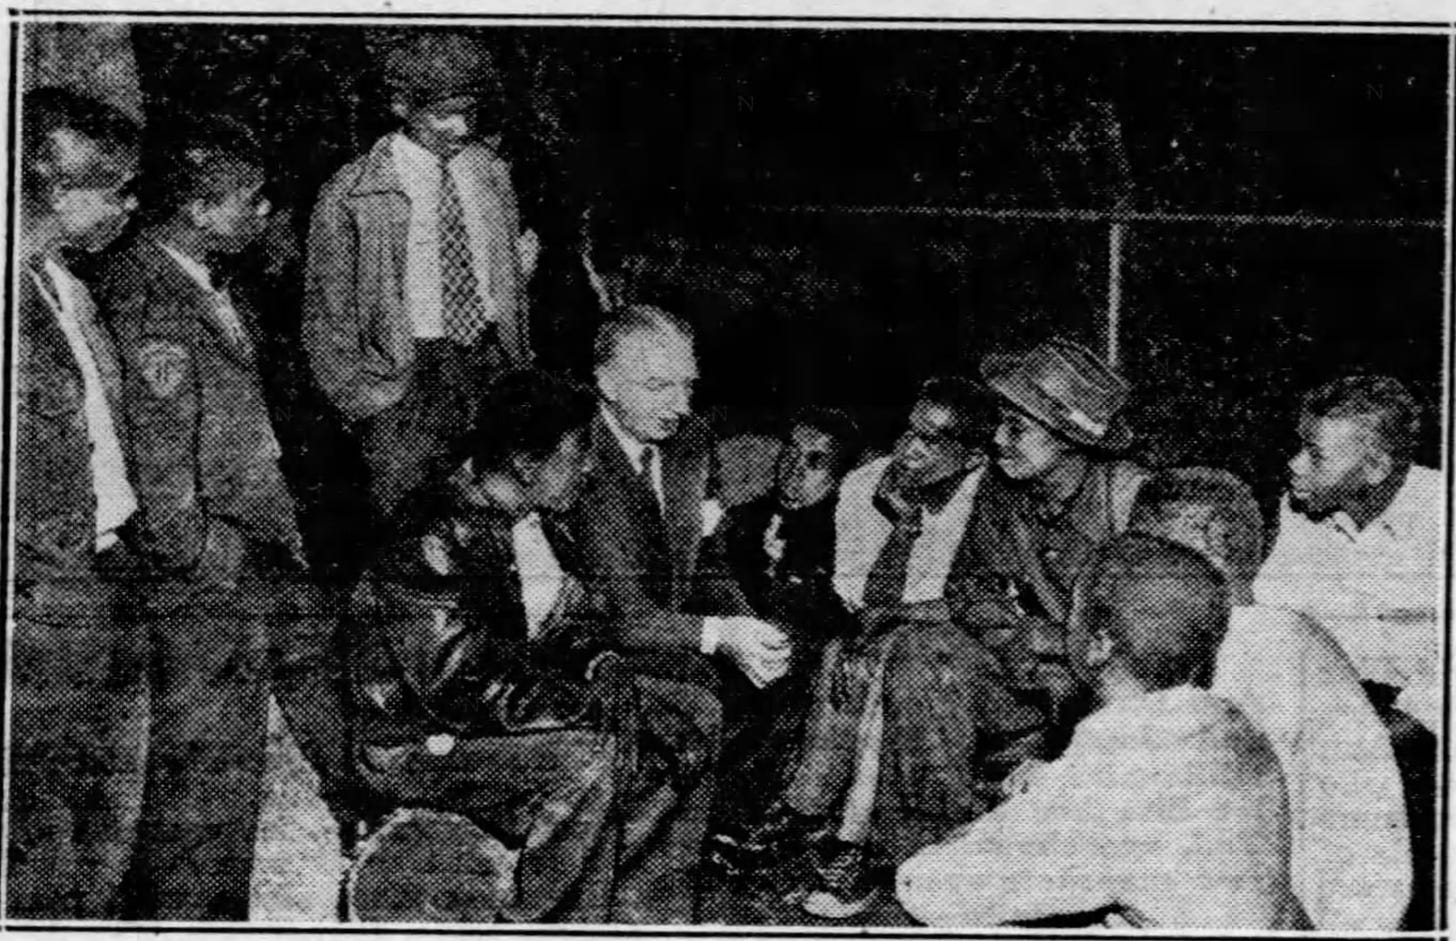 Image shows an older white man speaking with several Black teenage boys who are gathered around him listening.